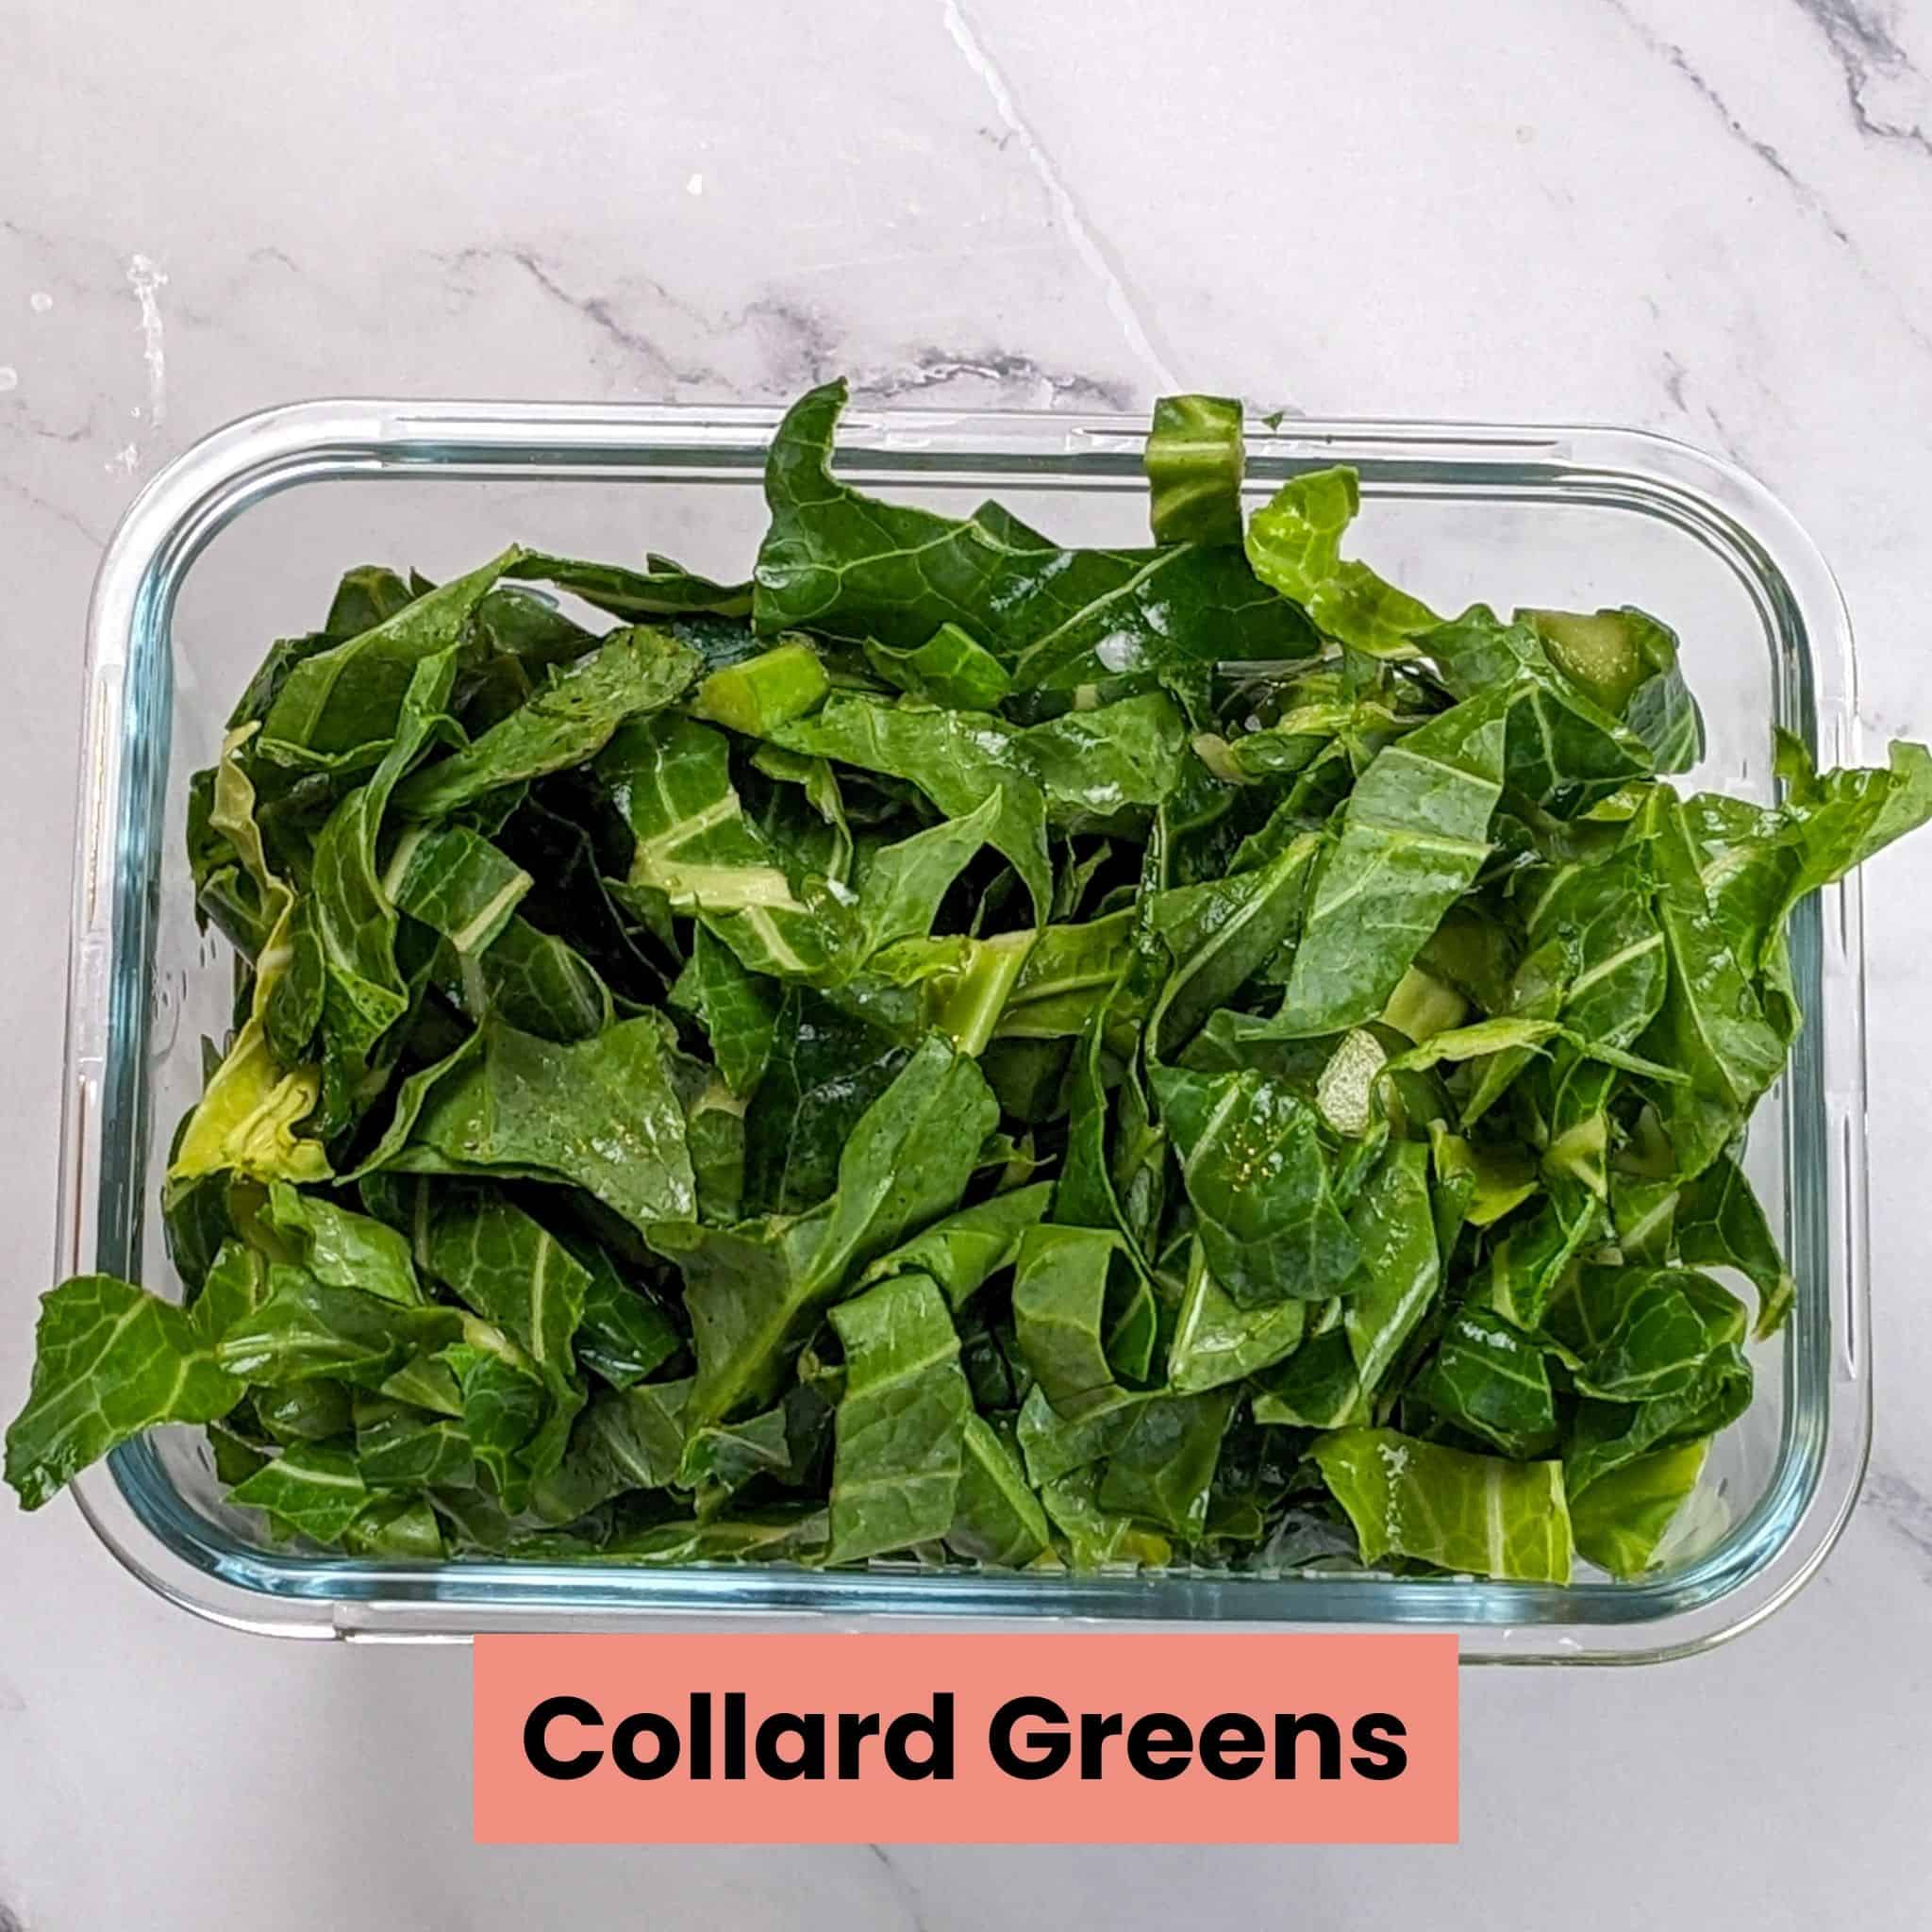 shredded collard greens in a glass rectangle container